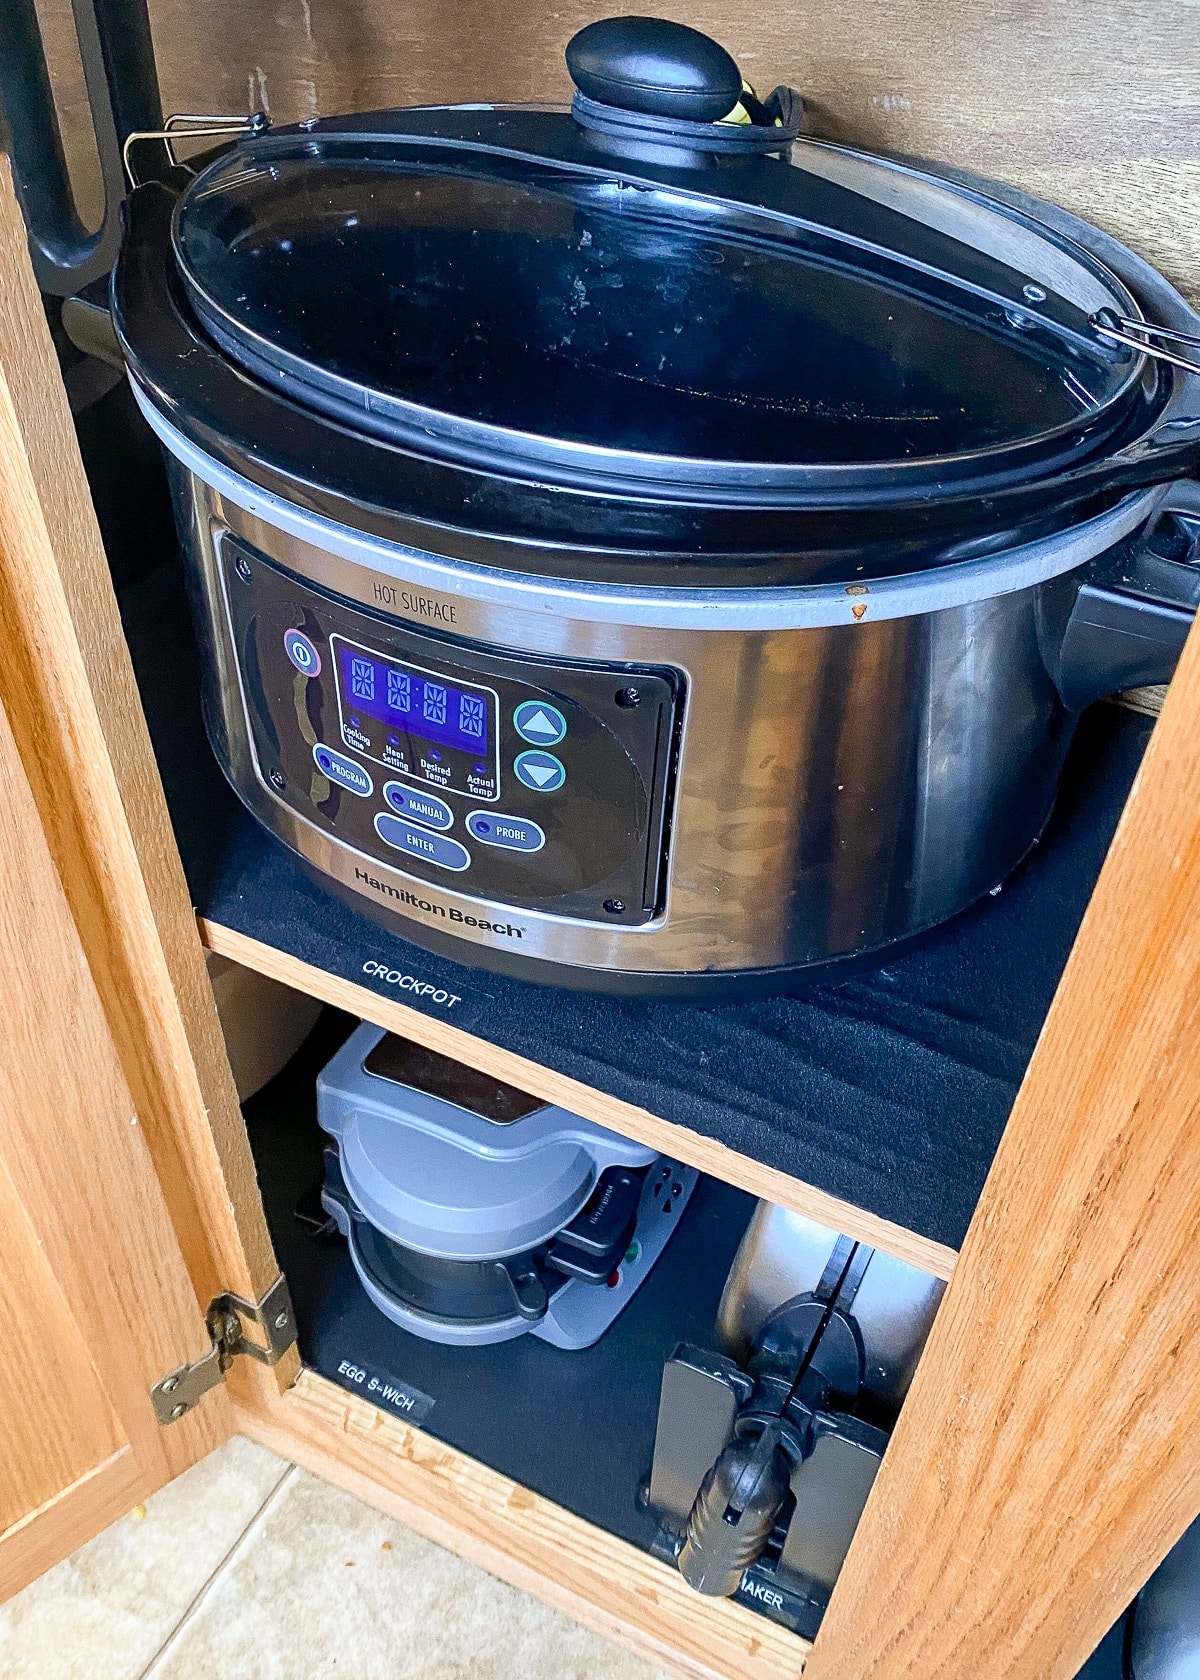 An Old-Fashioned Slow Cooker Is the Perfect Kitchen Appliance